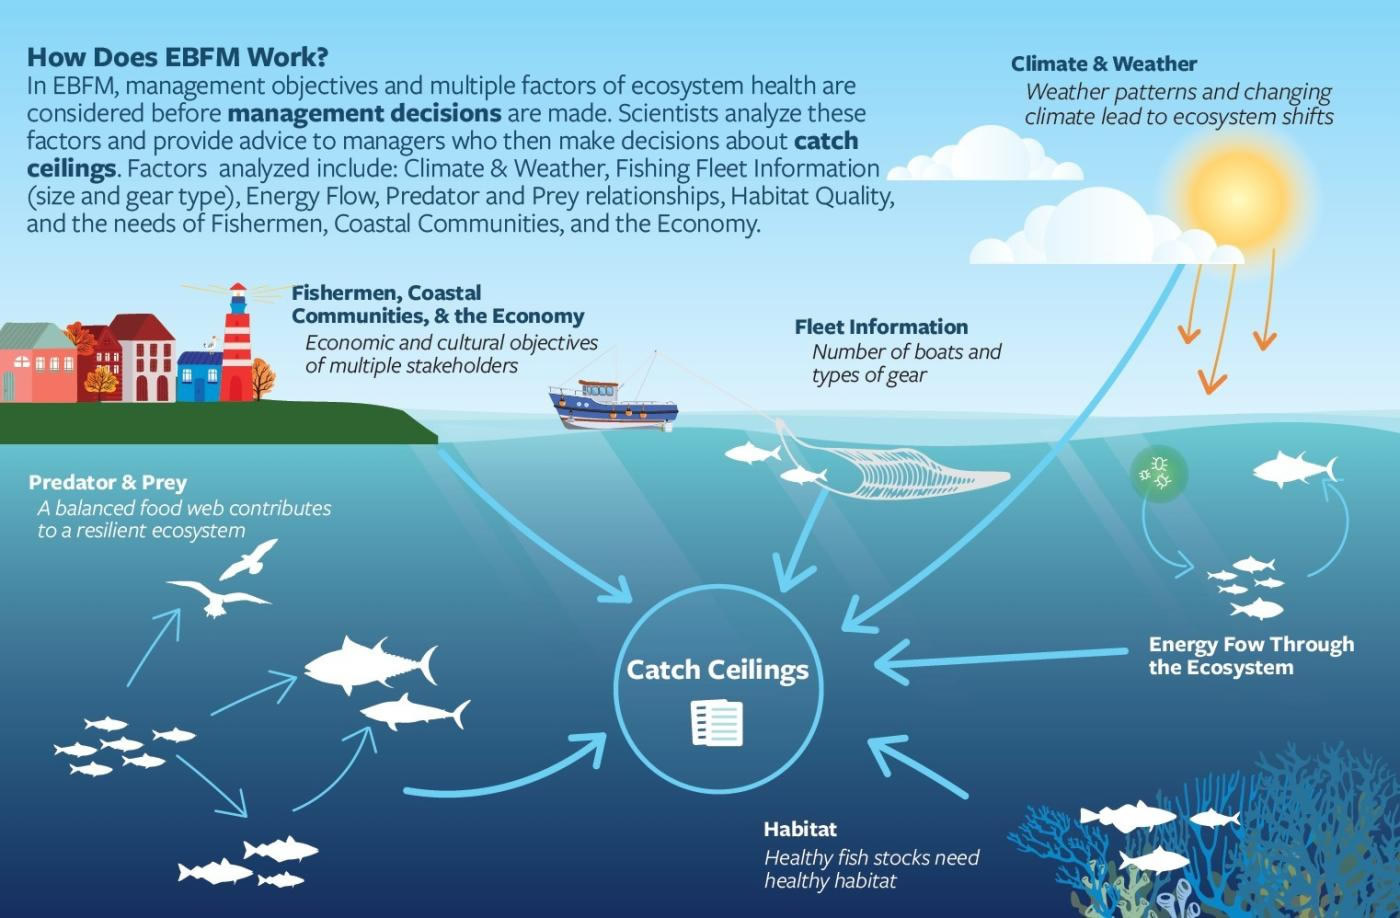 Is EBFM the future of fisheries management?